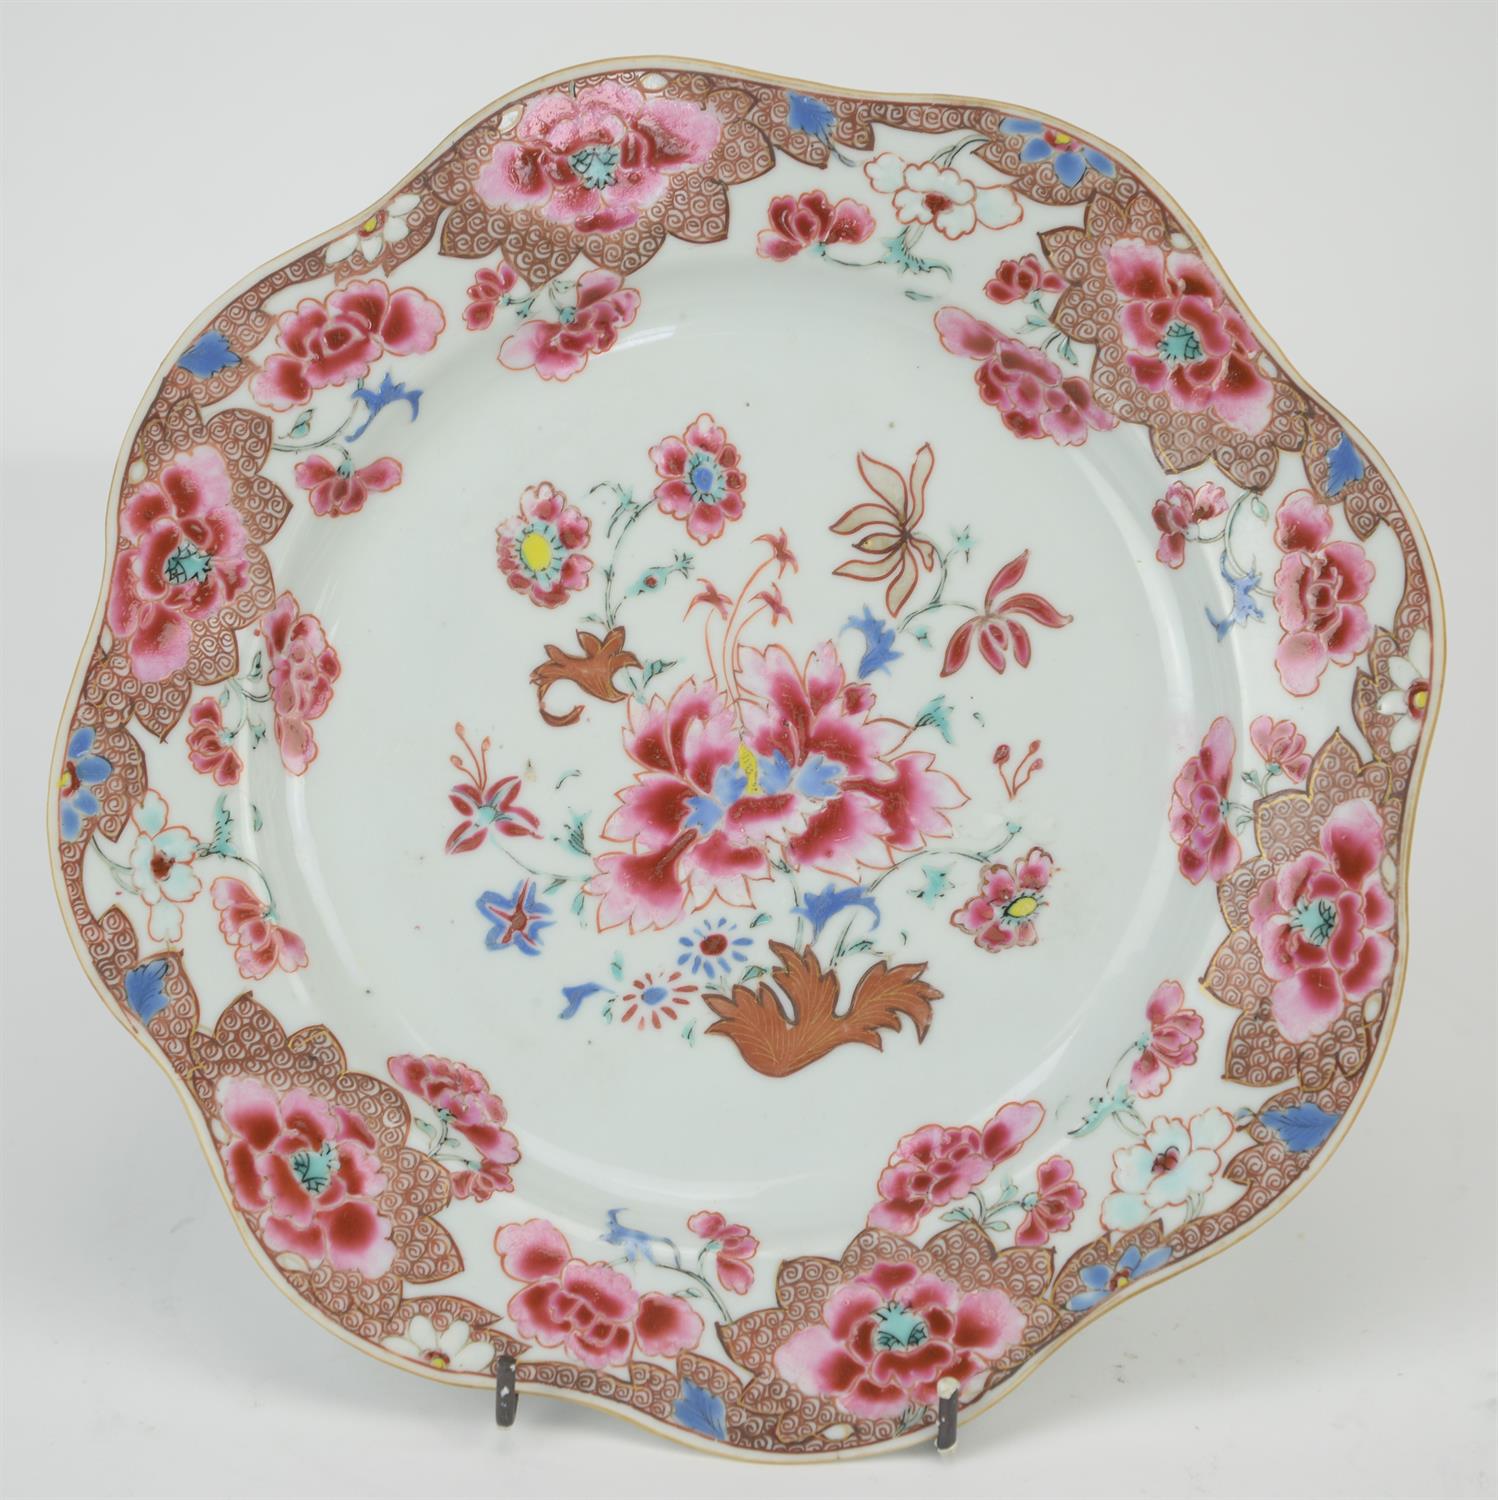 Eight famille rose dishes; each one decorated with floral designs and about 22.5 cm diameter - Image 13 of 14